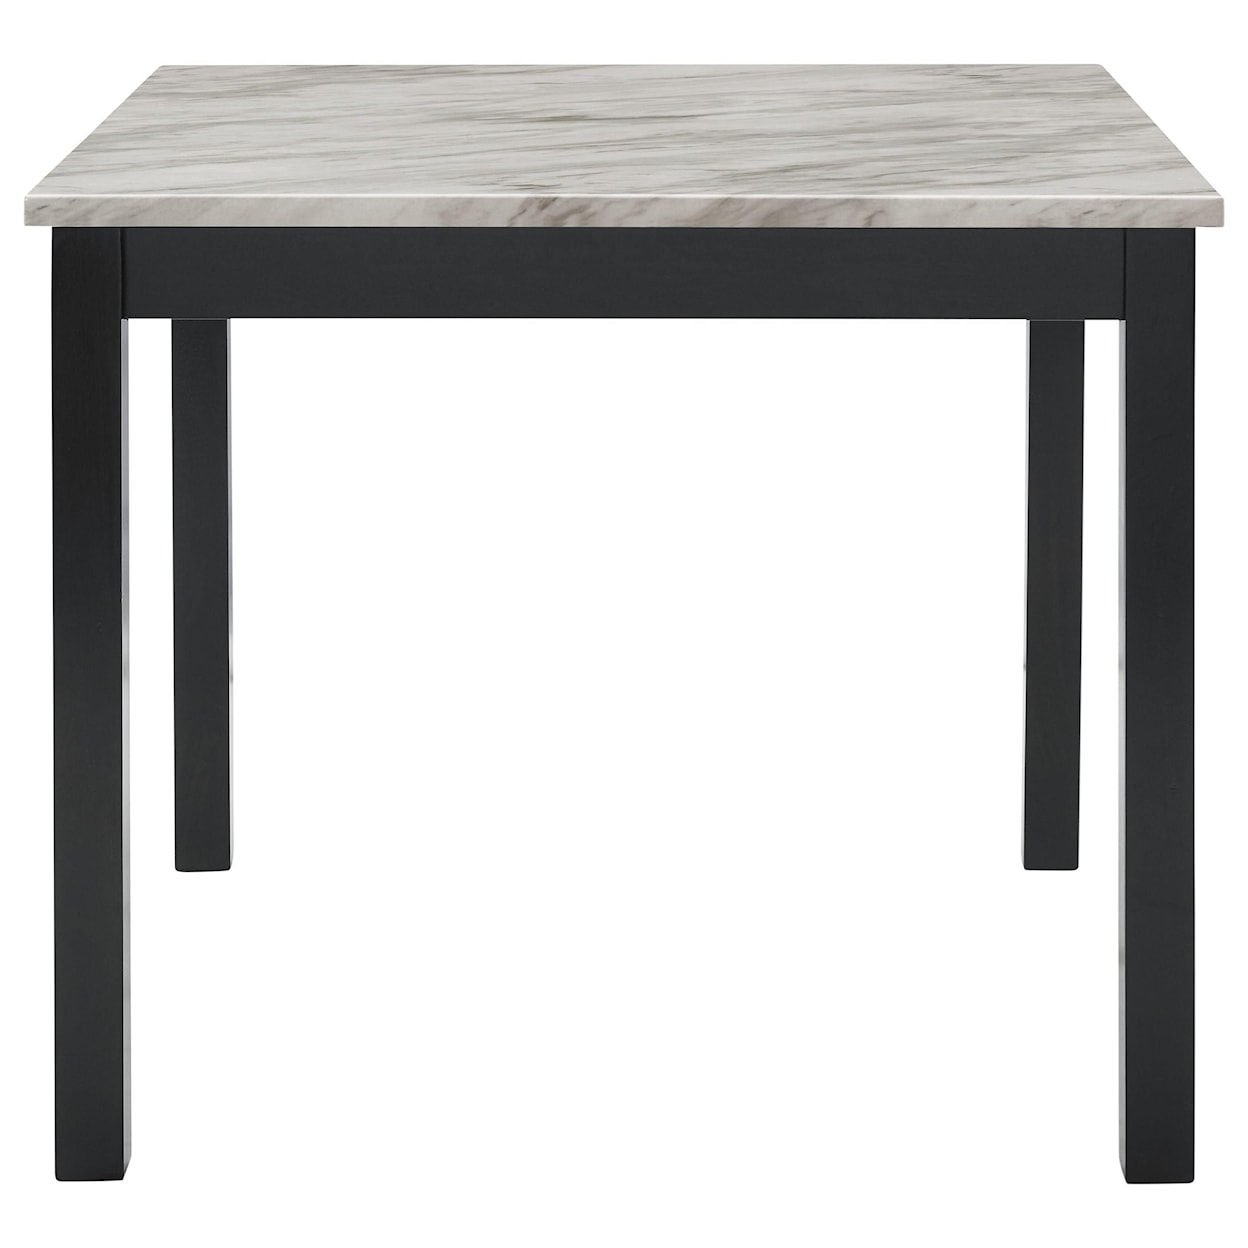 New Classic Furniture Celeste 5-Pc 42" Marble Finish Counter Table